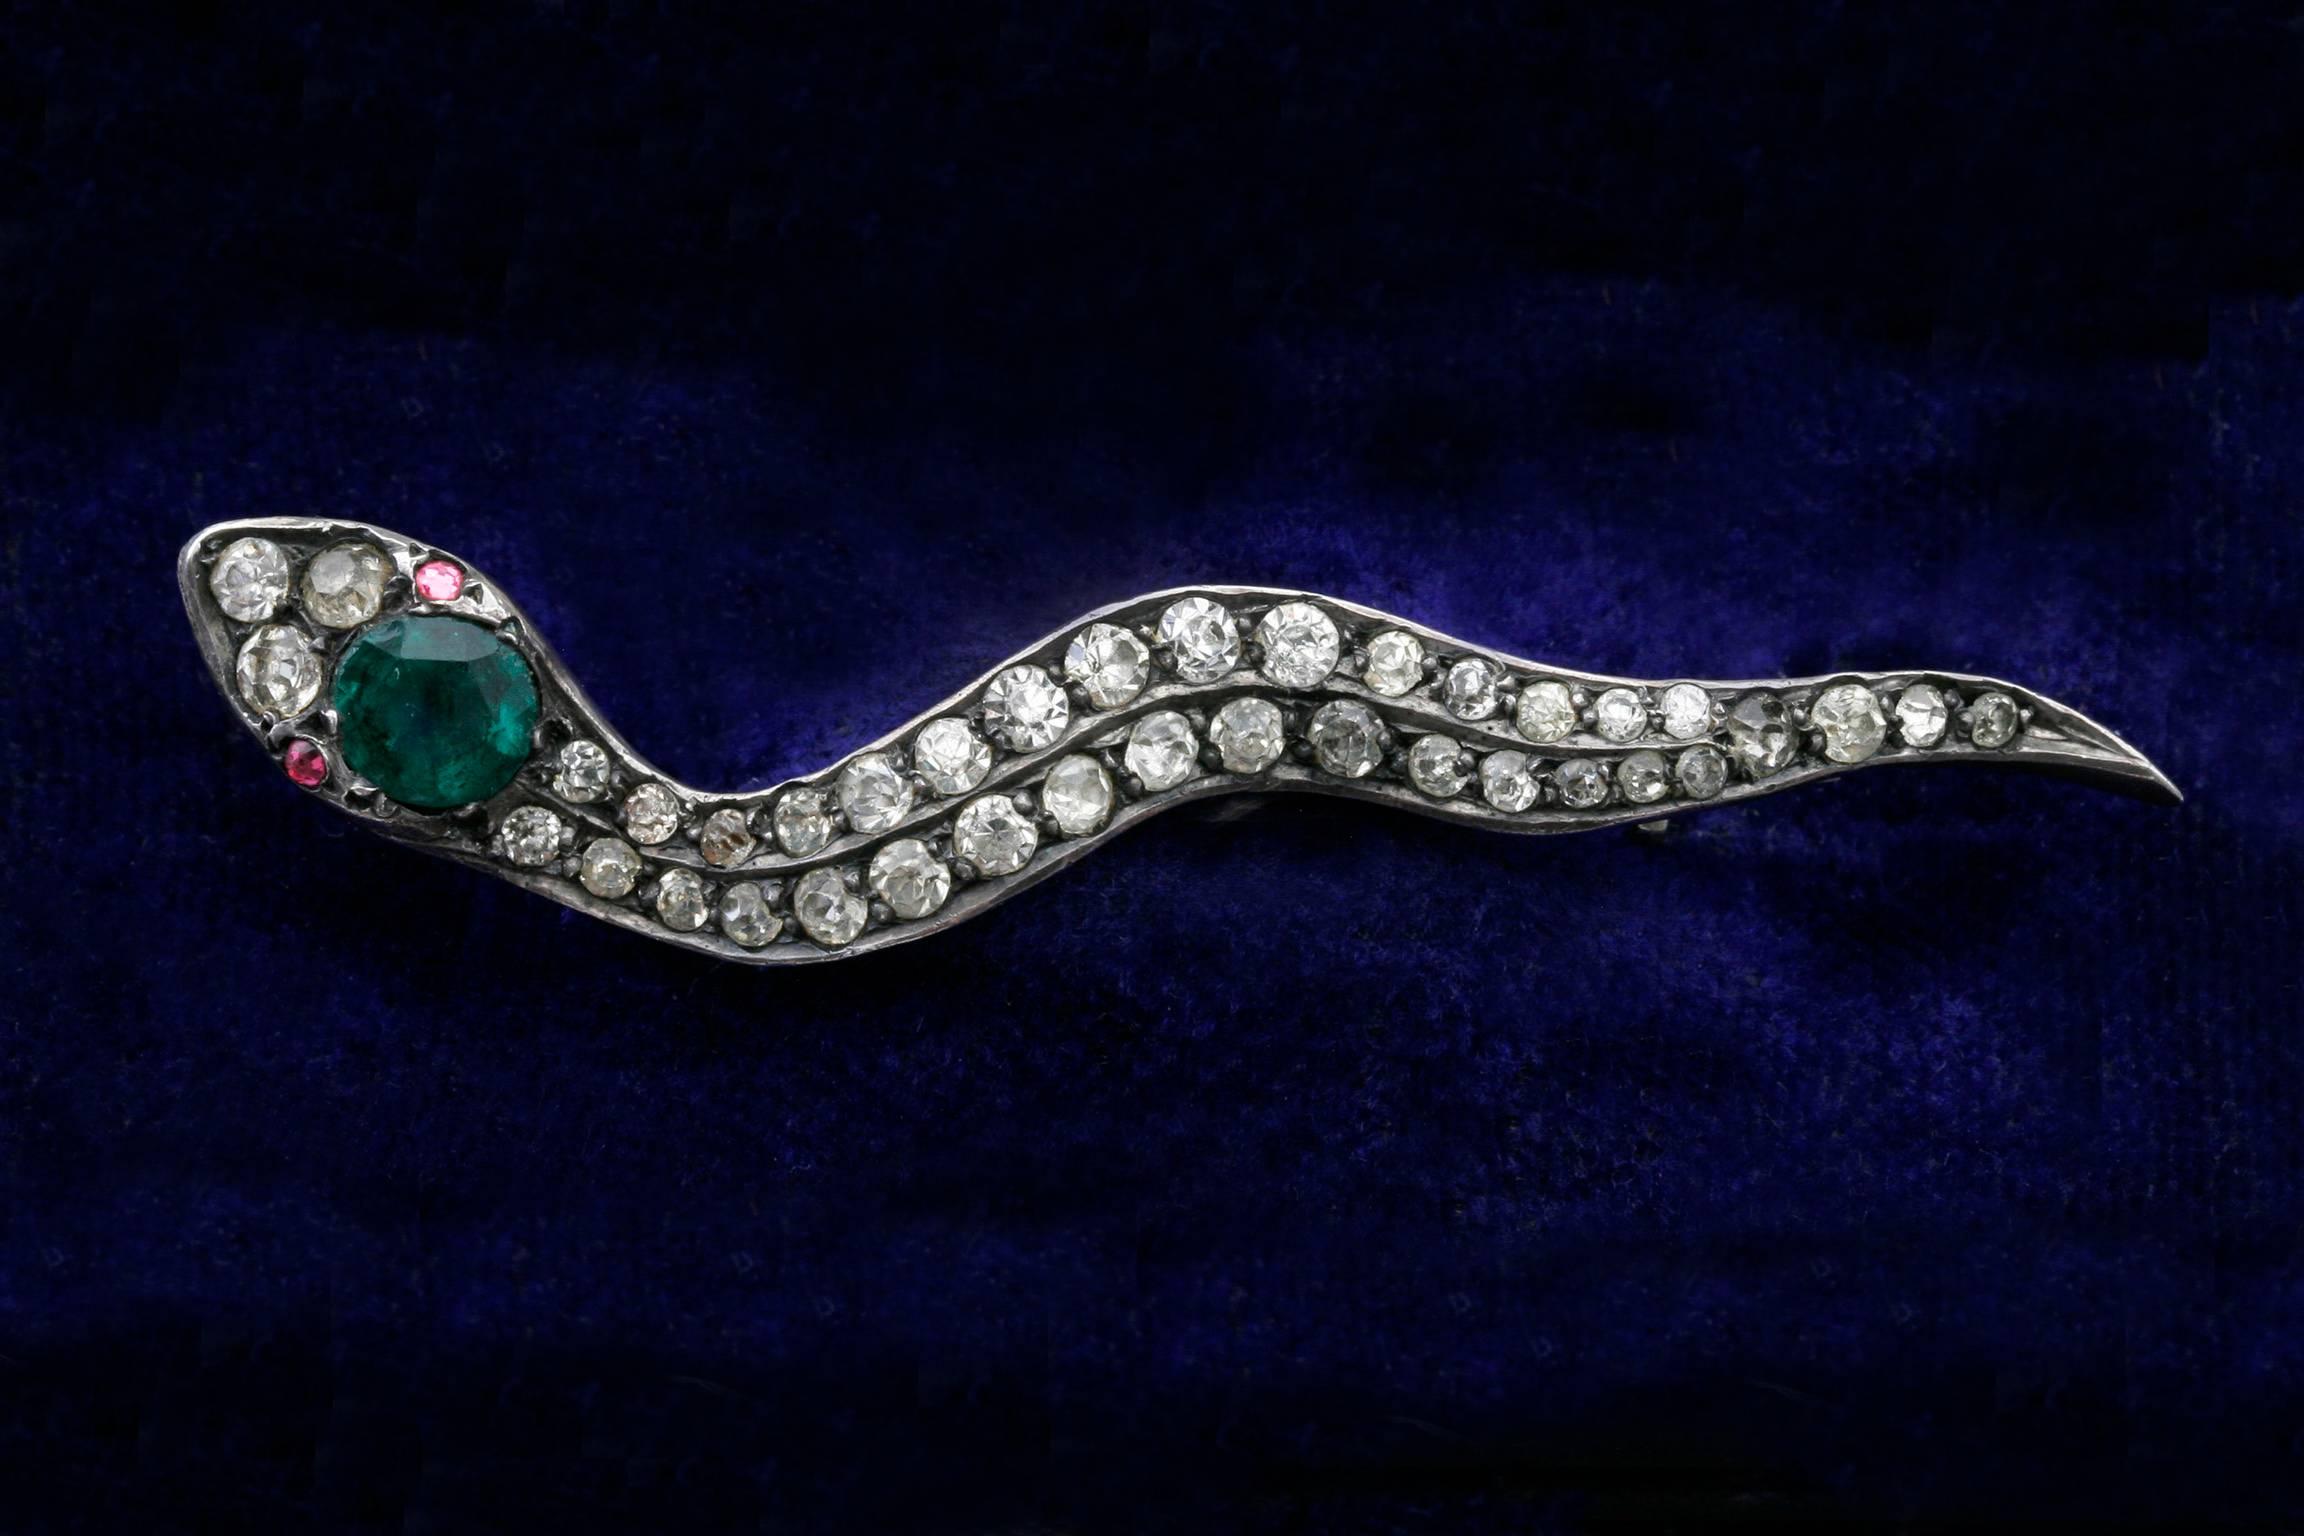 C.1910.  A lovely snake brooch set in sterling silver, stamped 935 (a common sterling stamp in Germany, Austria and Switzerland). Created throughout with glittering clear paste stones for the snake’s body, the brooch features emerald and ruby